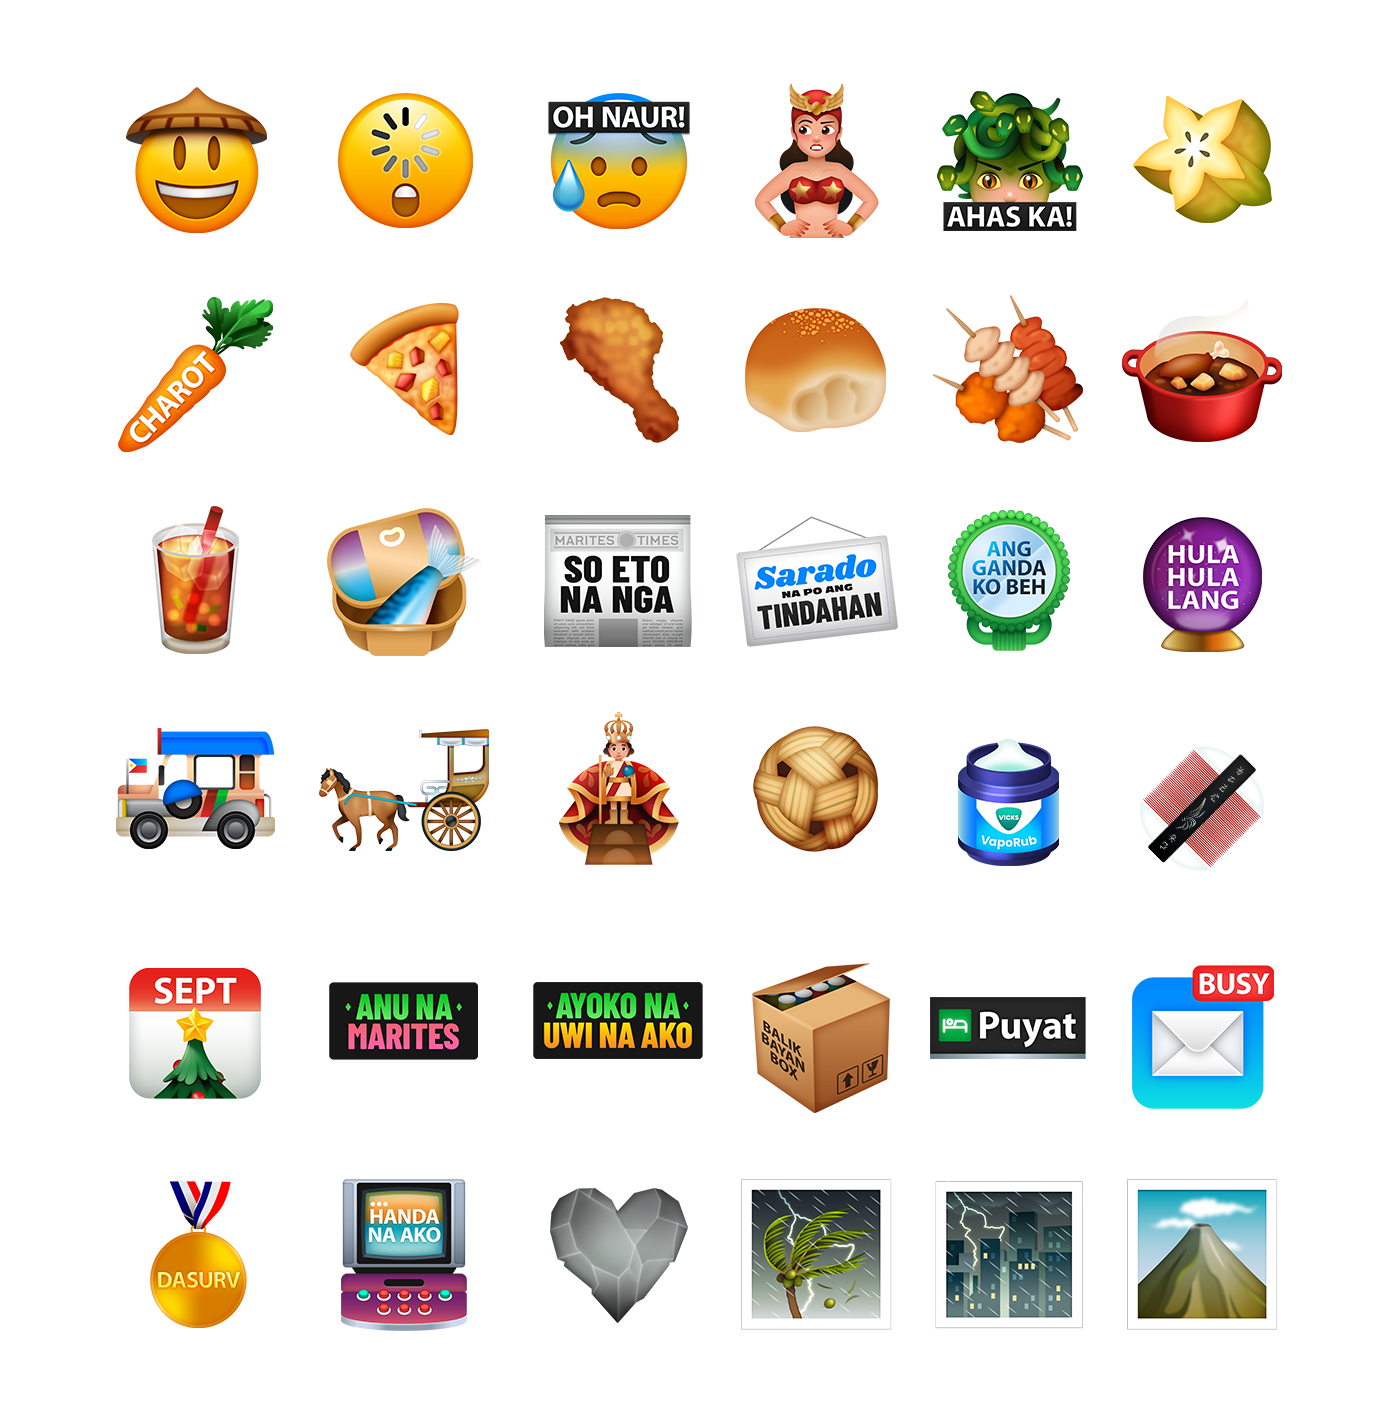 Pinoy Emojis are emojis inspired by the Filipinos and the Philippines.